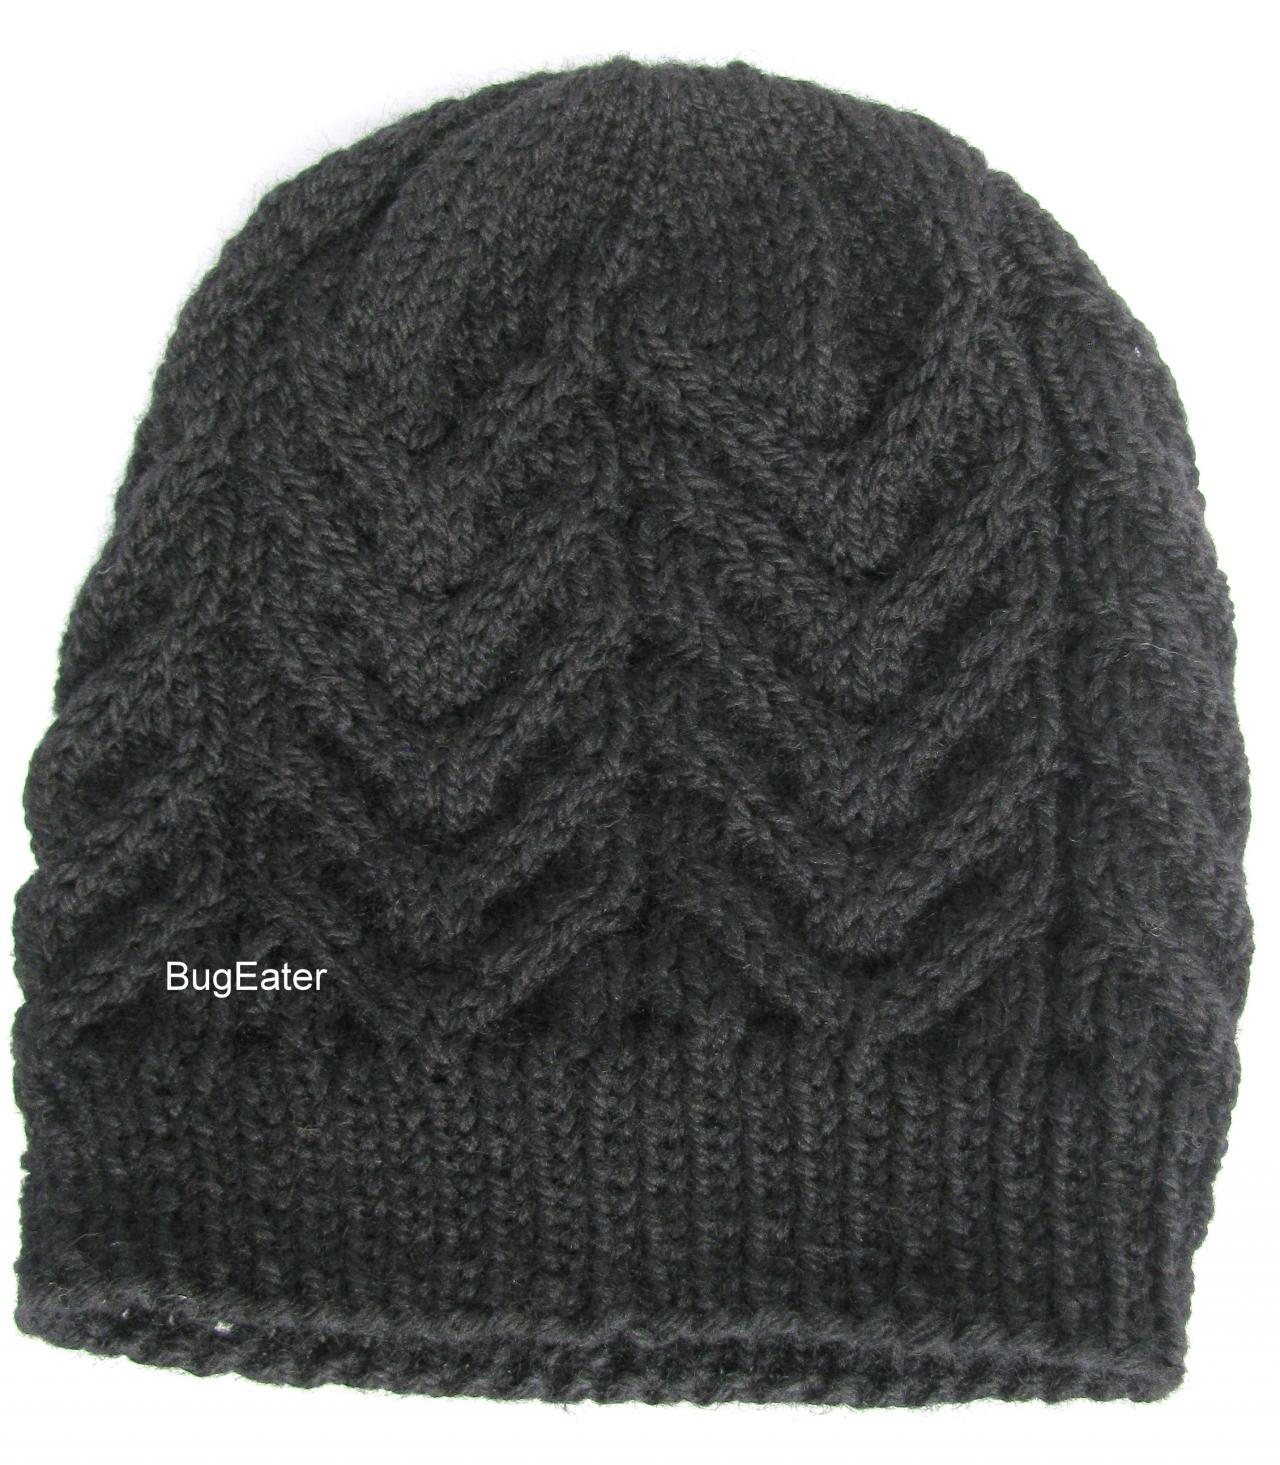 Black Wool Hat, Cable Knit Hat, Hand Knit Wool Hat